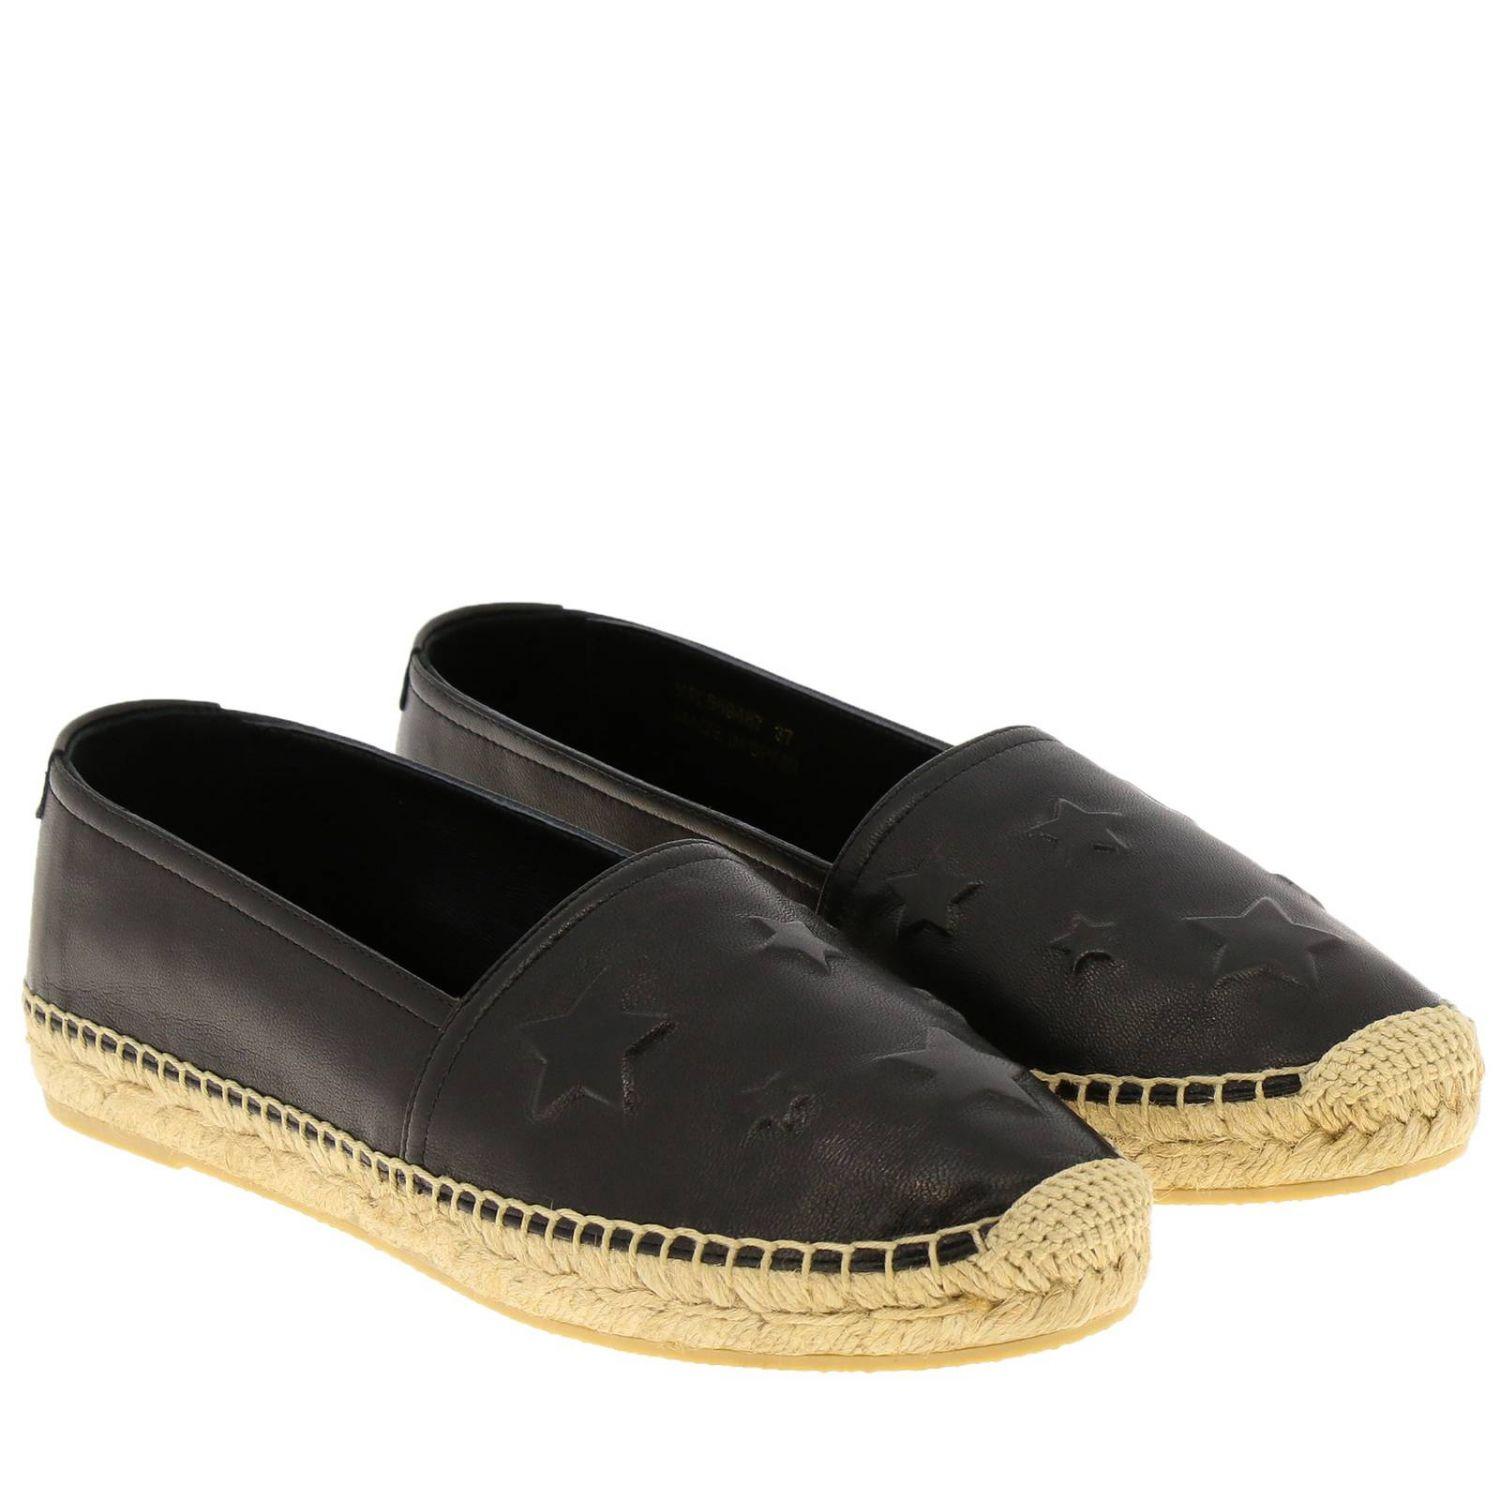 Saint Laurent Star Embossed Black Leather Espadrille

These Saint Laurent black leather espadrilles feature an almond toe, braided raffia rubber sole, and a slip-on style. Brand new. Made in Spain.

Size: 36.5